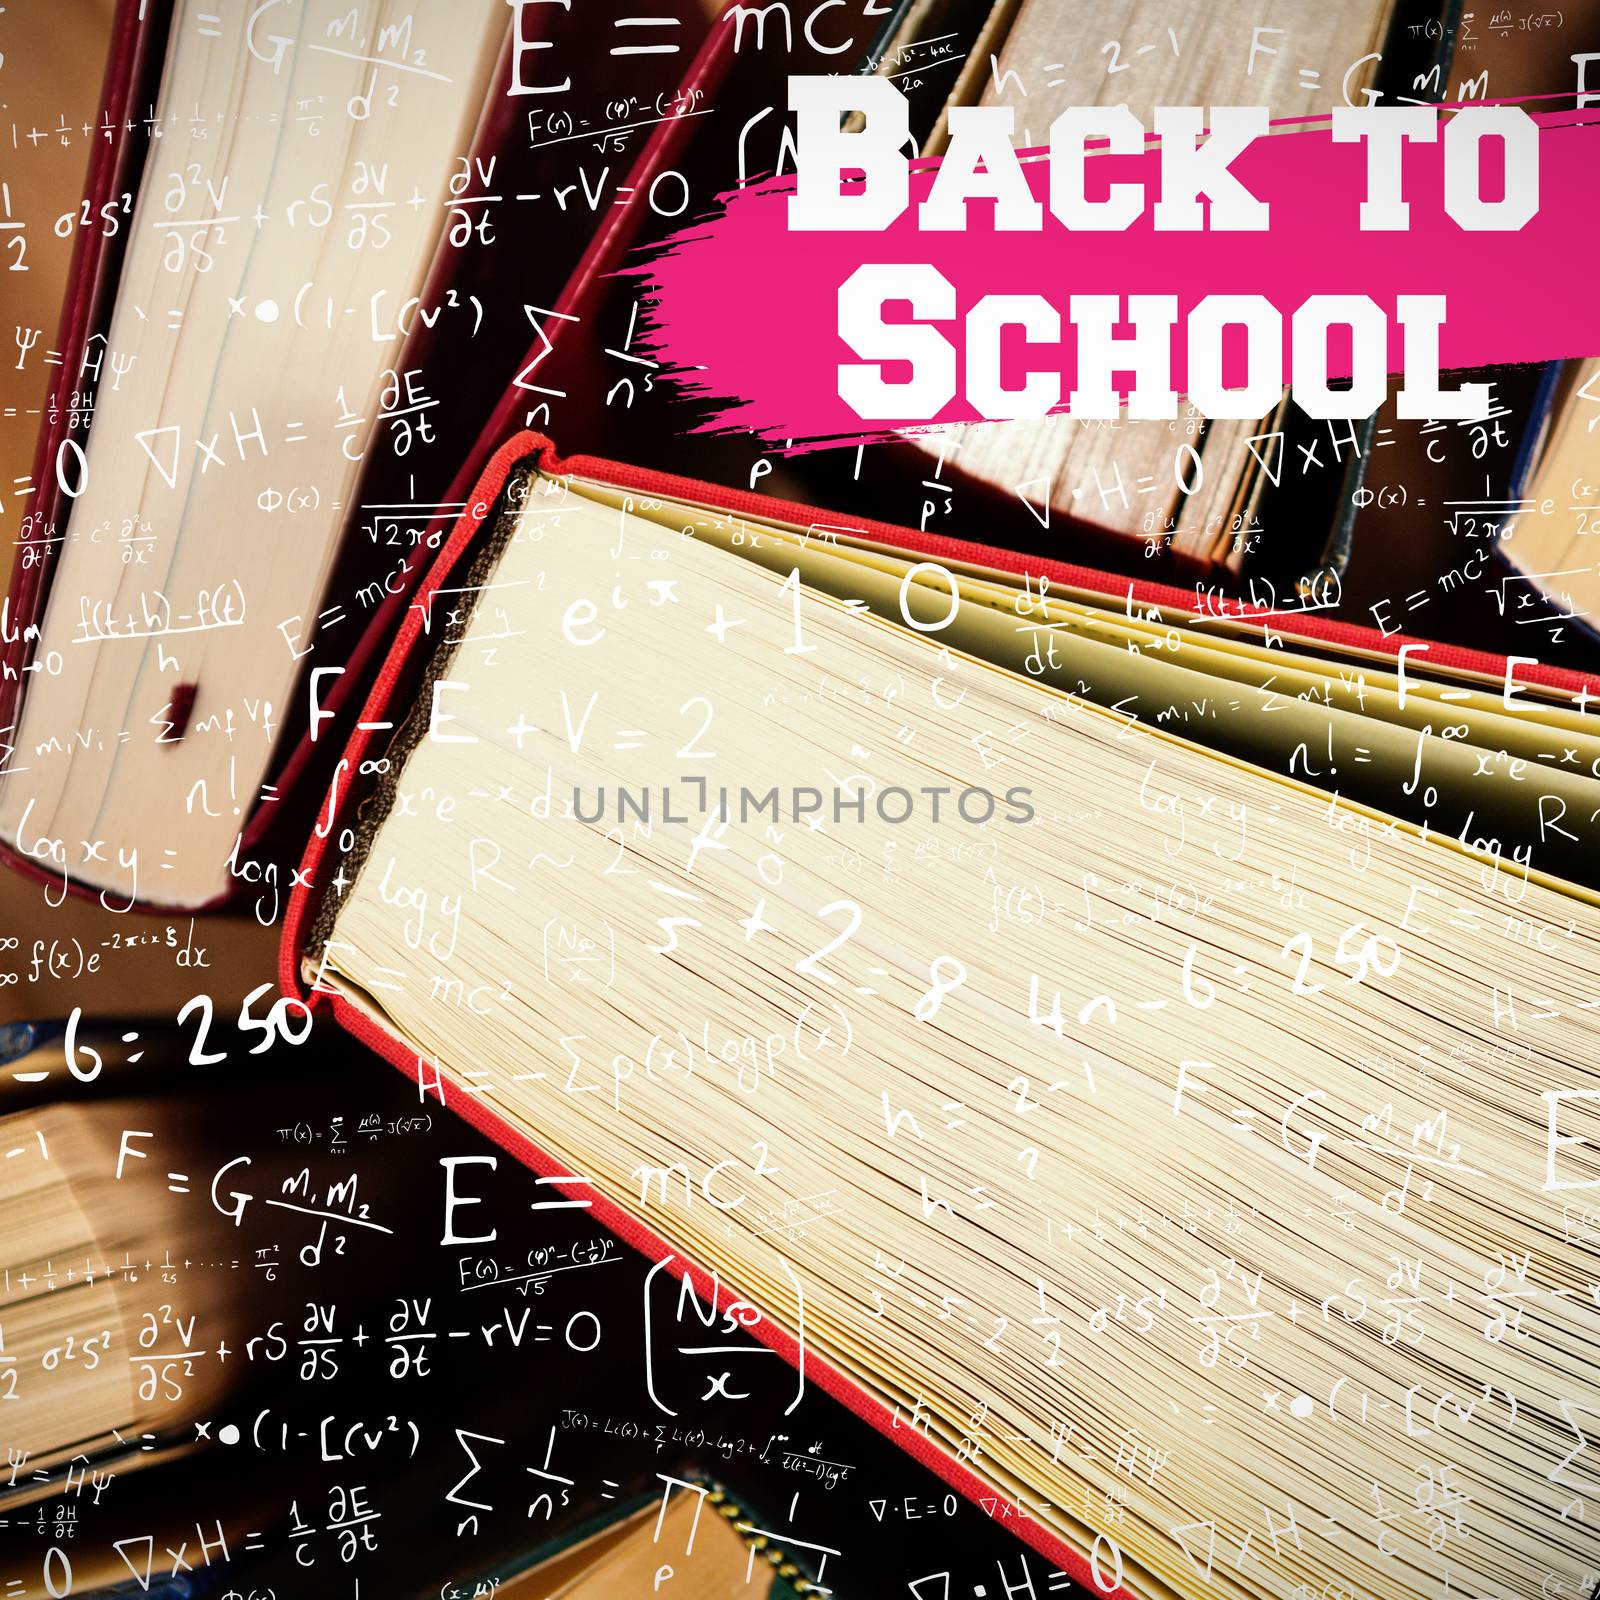 Back to school message against close-up of books arranged